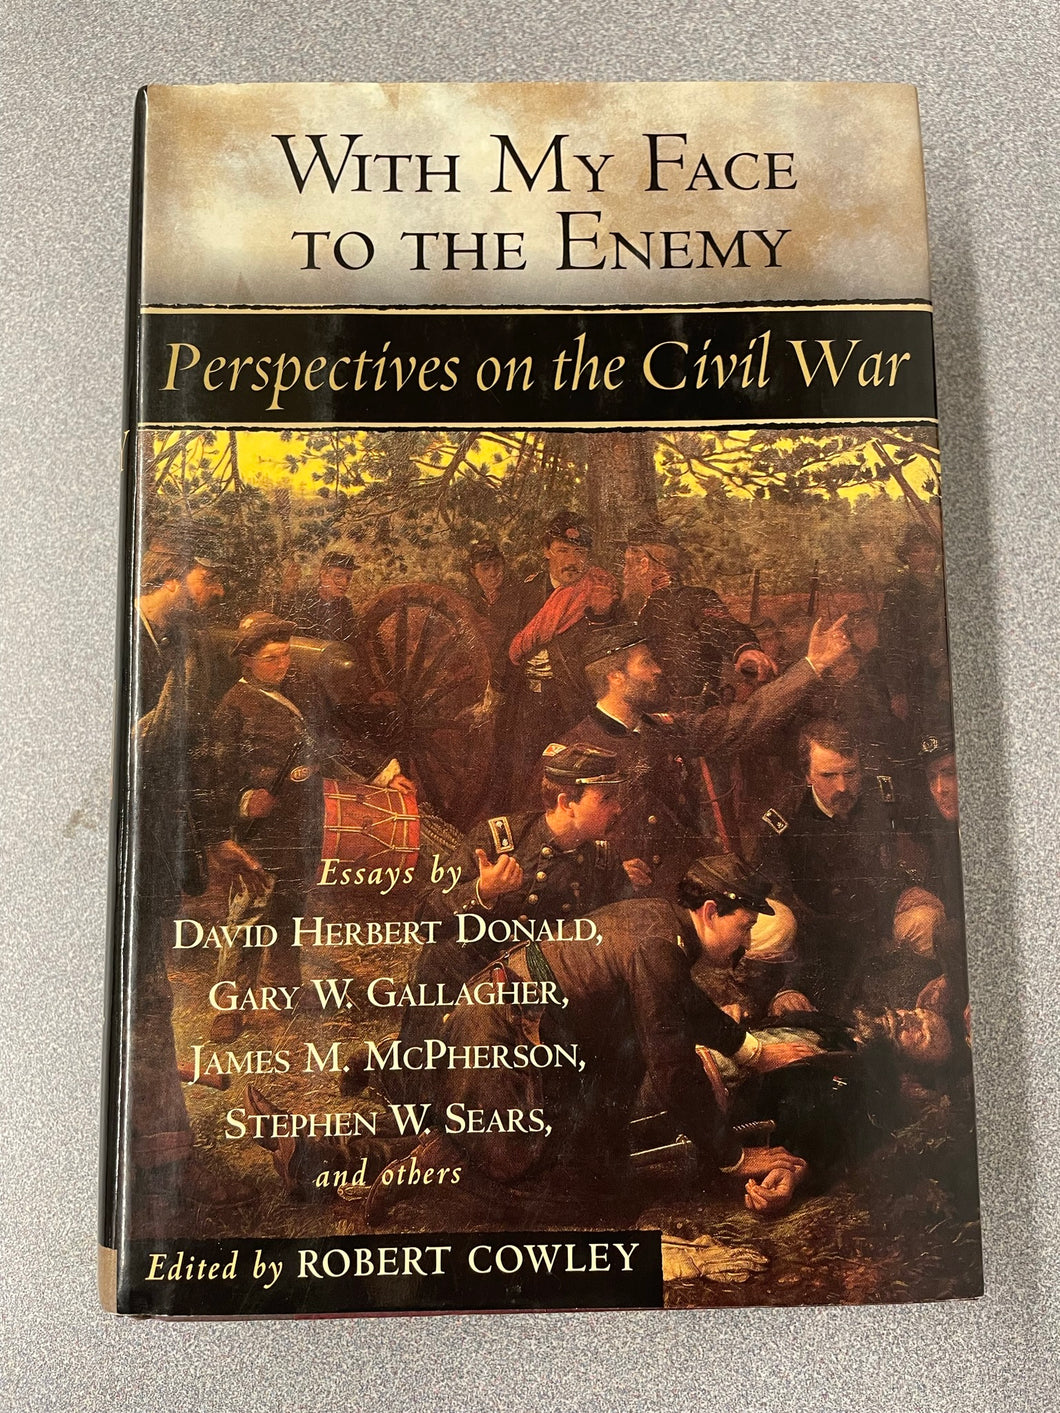 With My Face to the Enemy: Perspectives on the Civil War, Cowley, Robert, ed.,[2001] AN 9/23